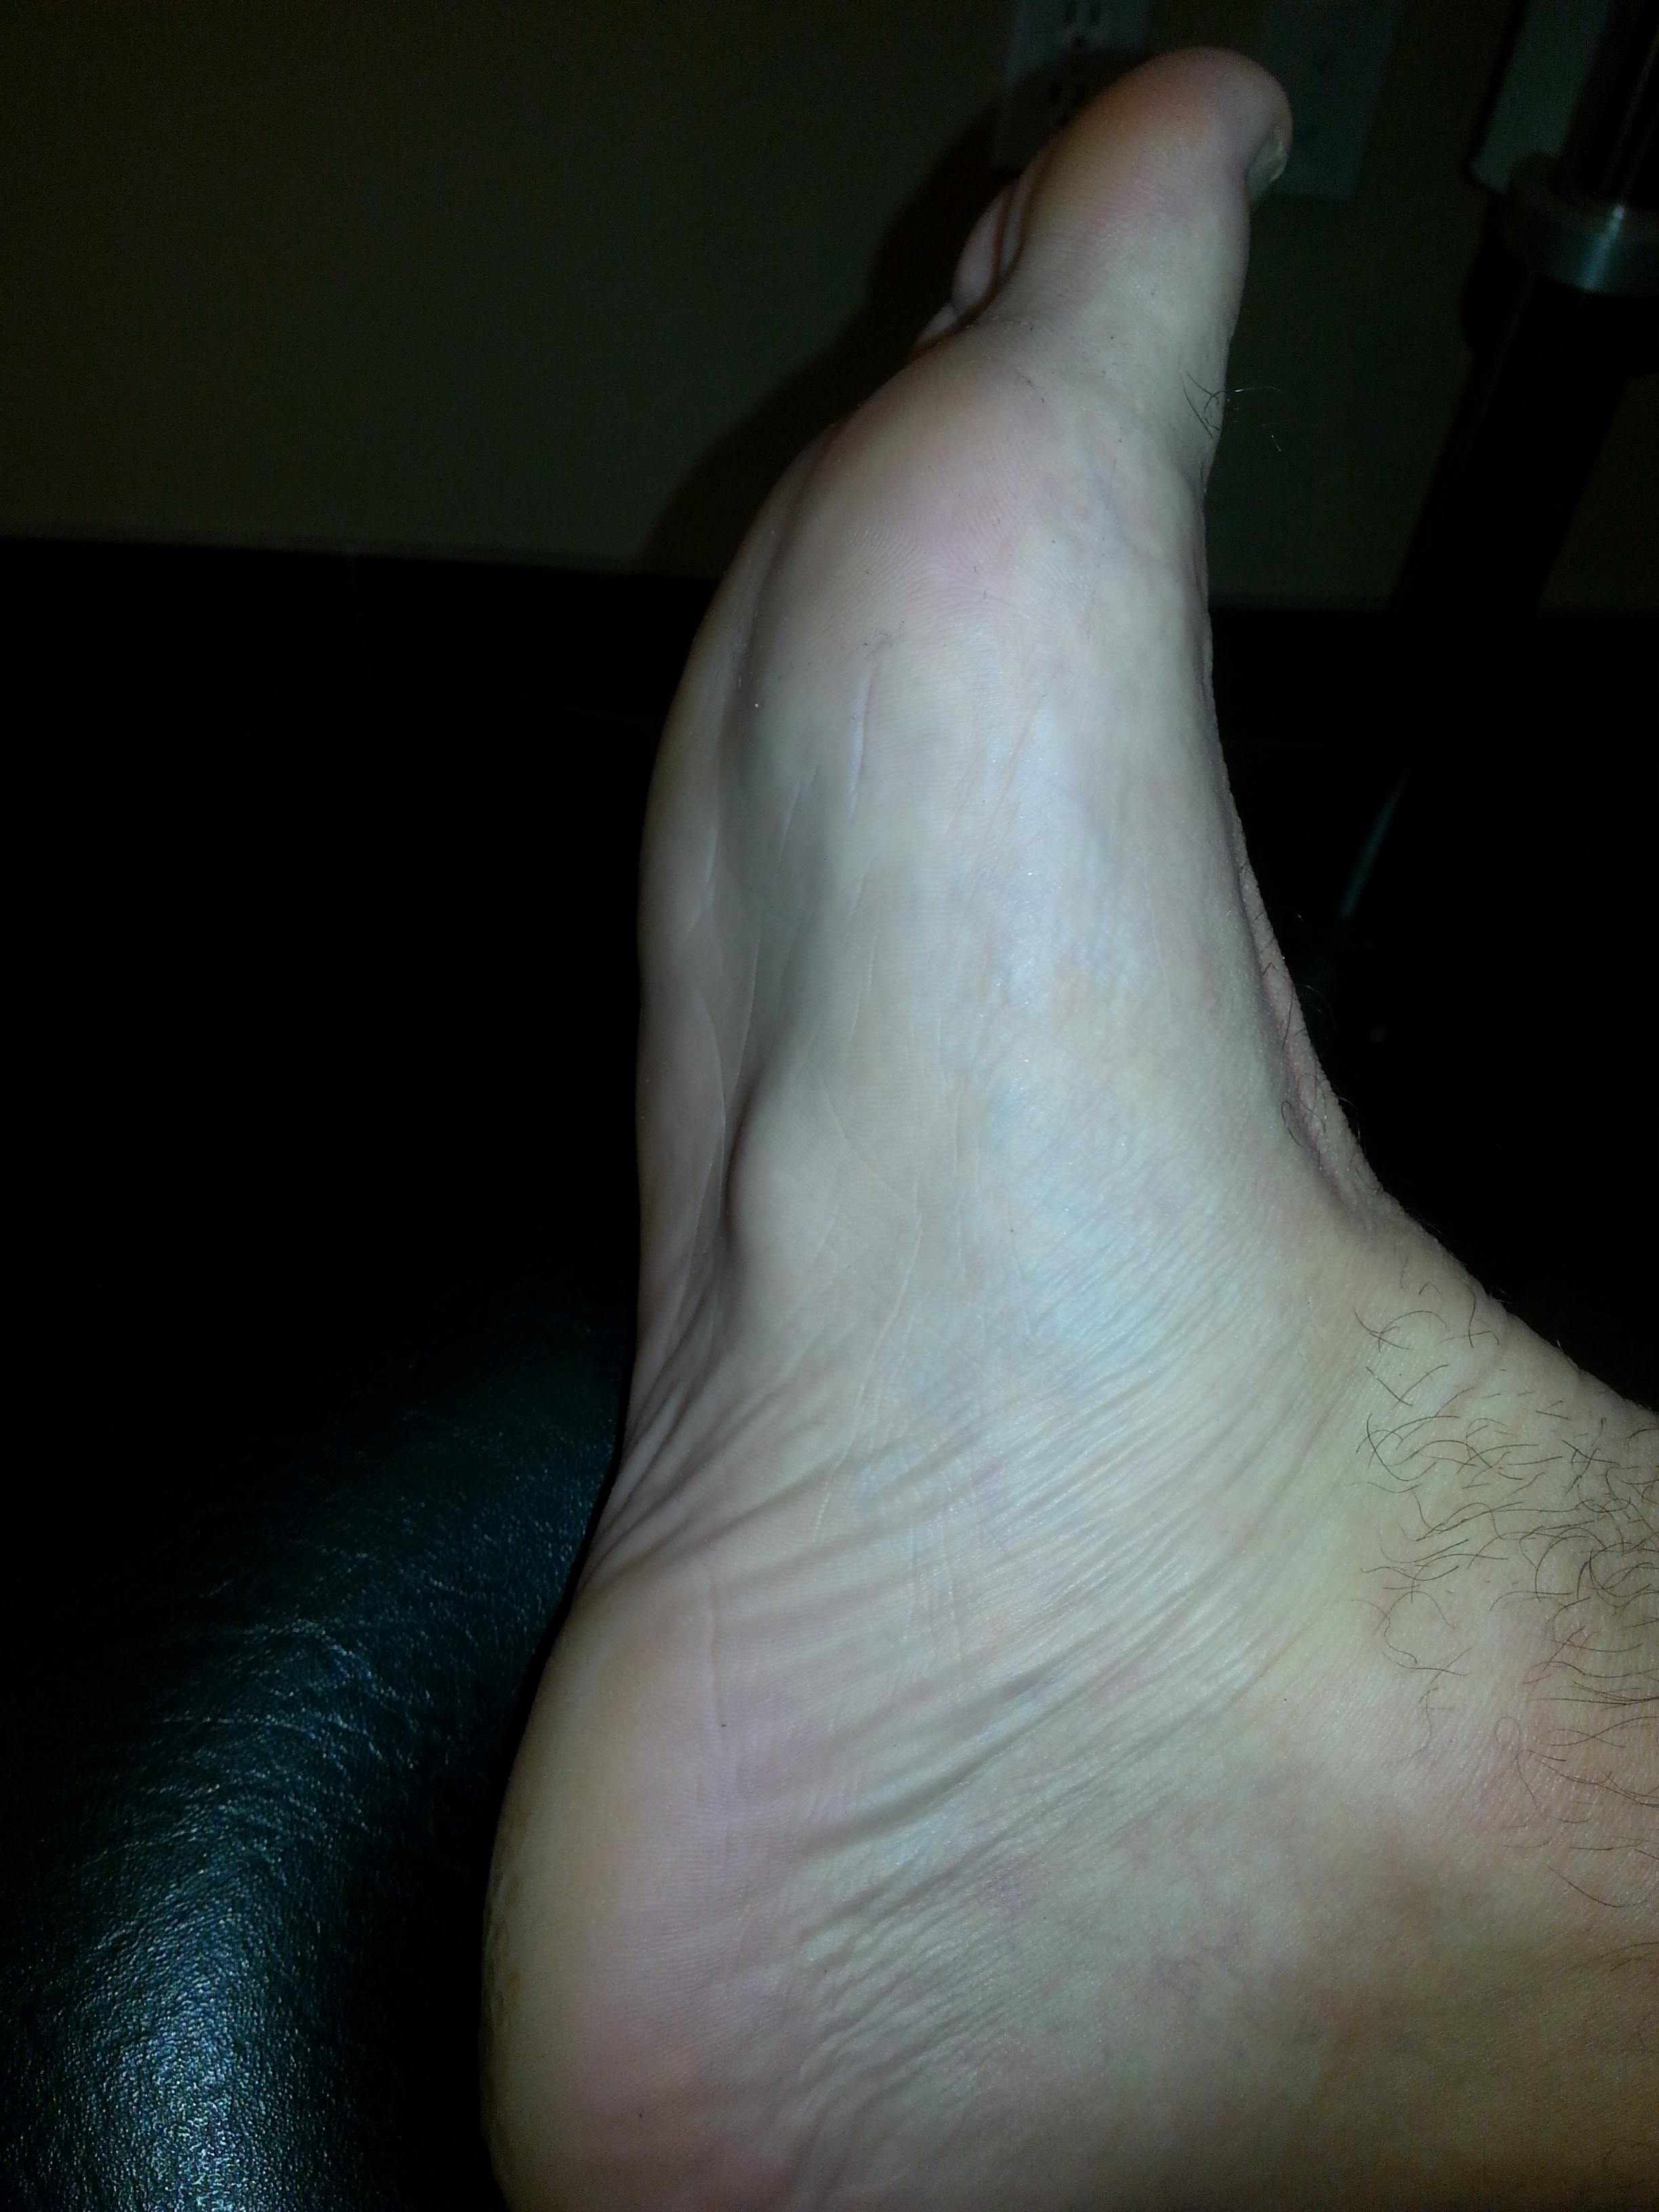 arp wave therapy for plantar fasciitis